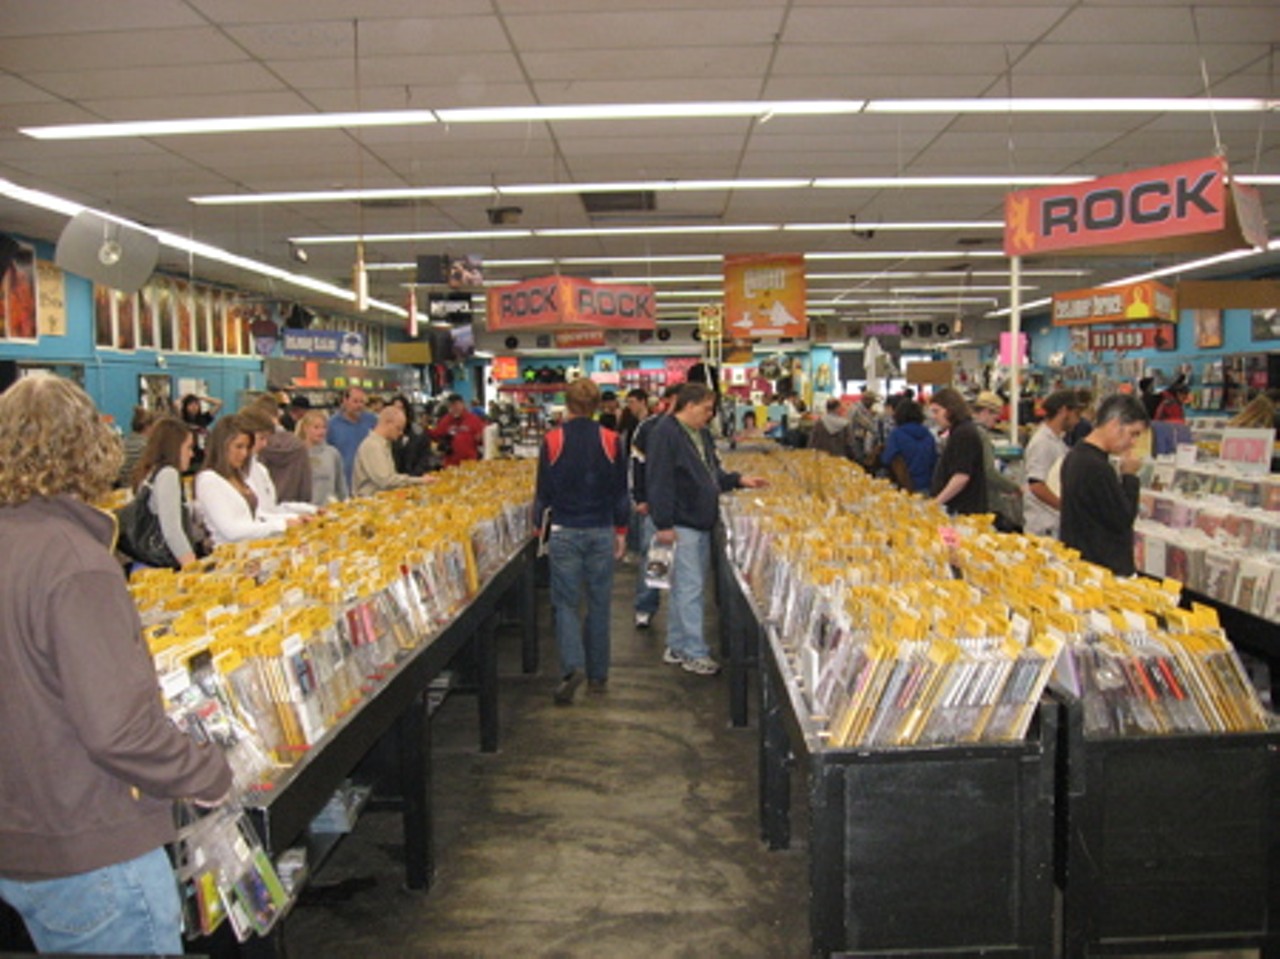 A packed Vintage Vinyl marked the celebration of the 1st Annual Record Store day.